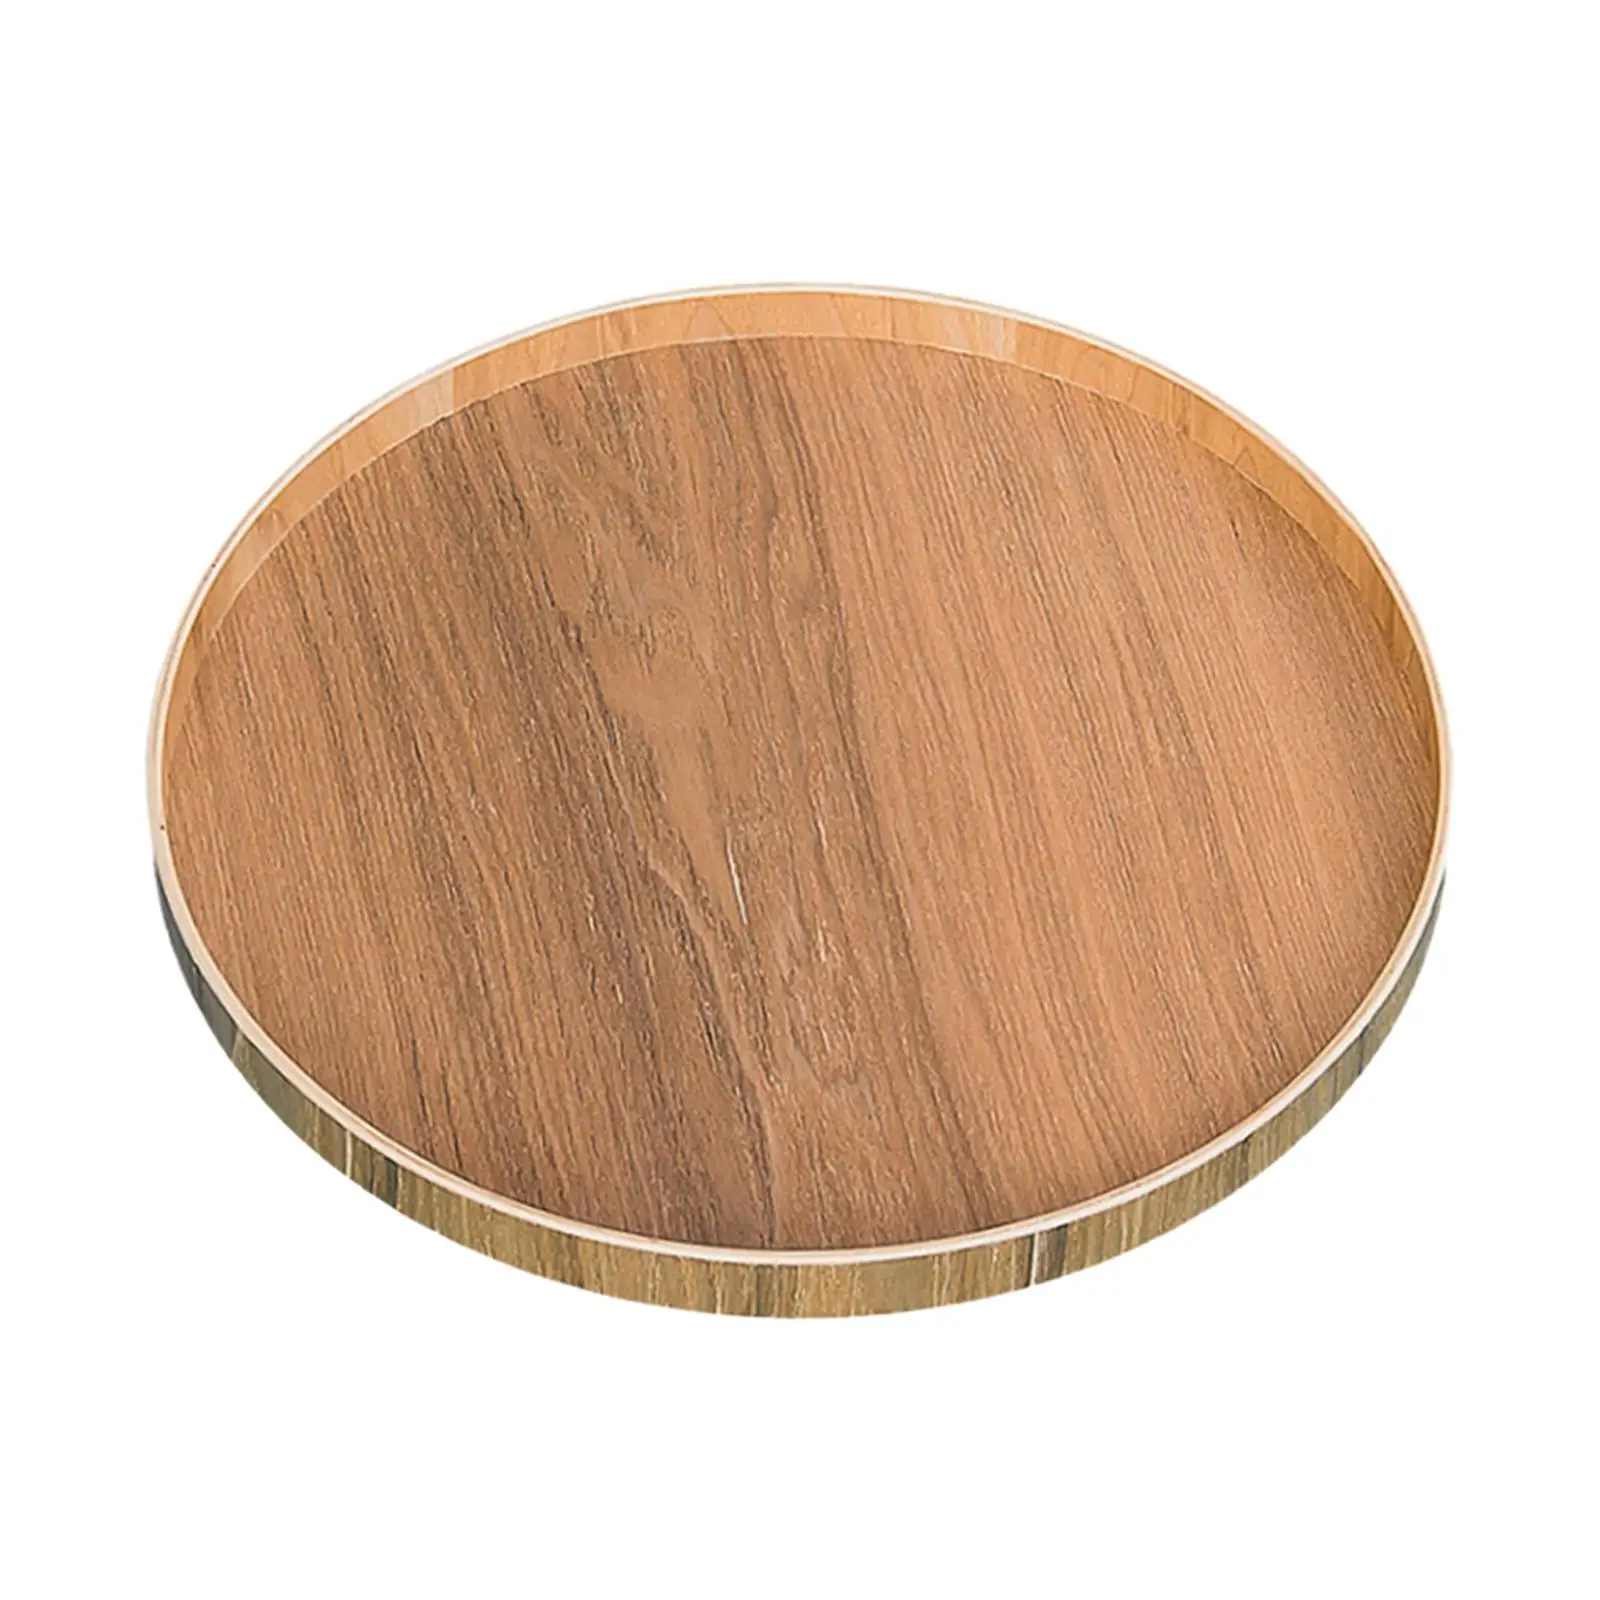 Round Serving Tray Multipurpose Farmhouse Decorative Tray Fruit Plate for Home Kitchen Countertop Dining Table Bathroom Pantry